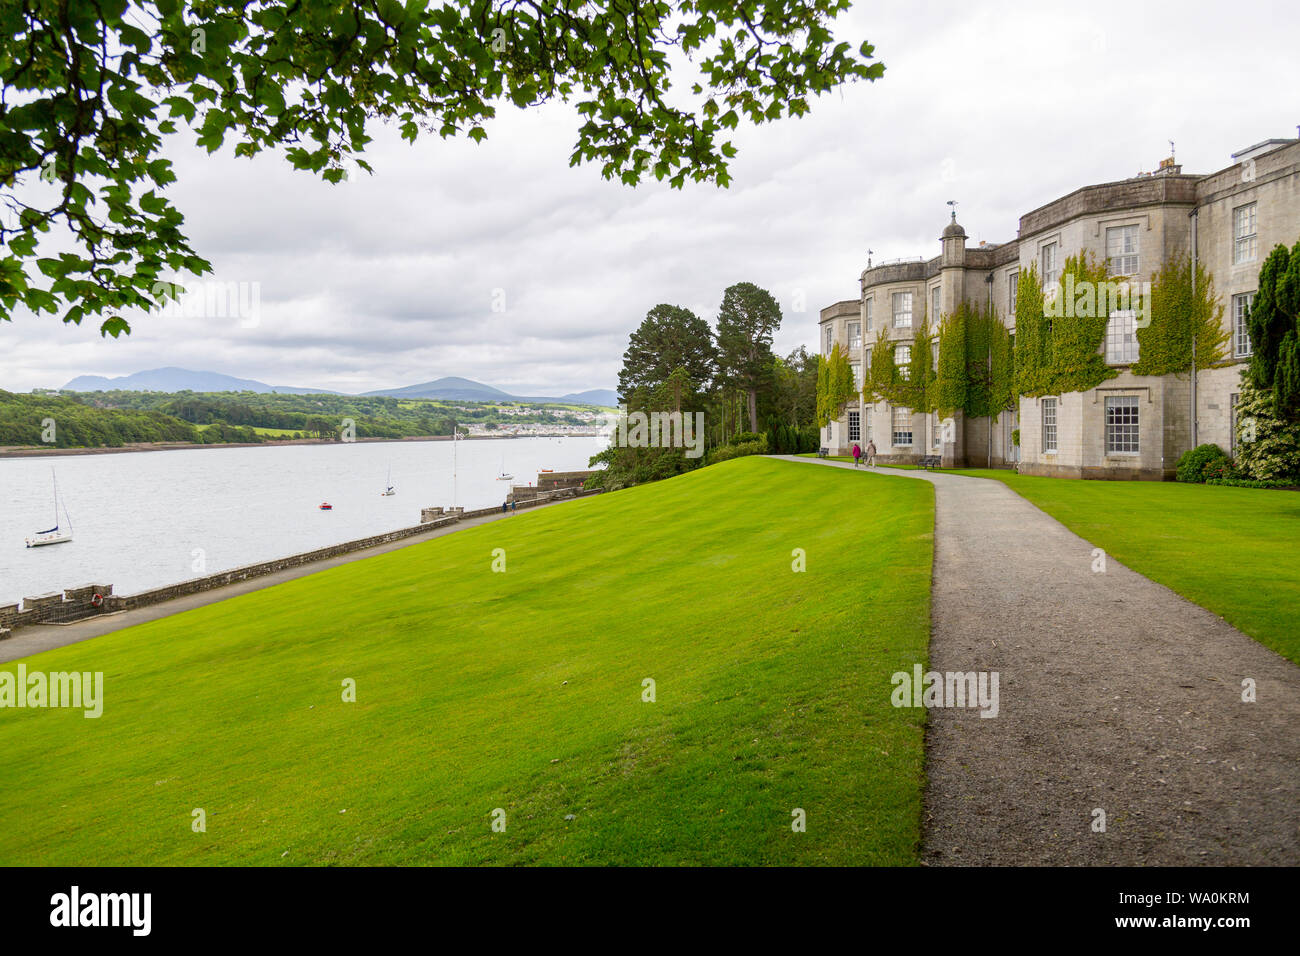 The imposing country house of Plas Newydd sits on the banks of the Menai Straits, Anglesey, Wales, UK Stock Photo